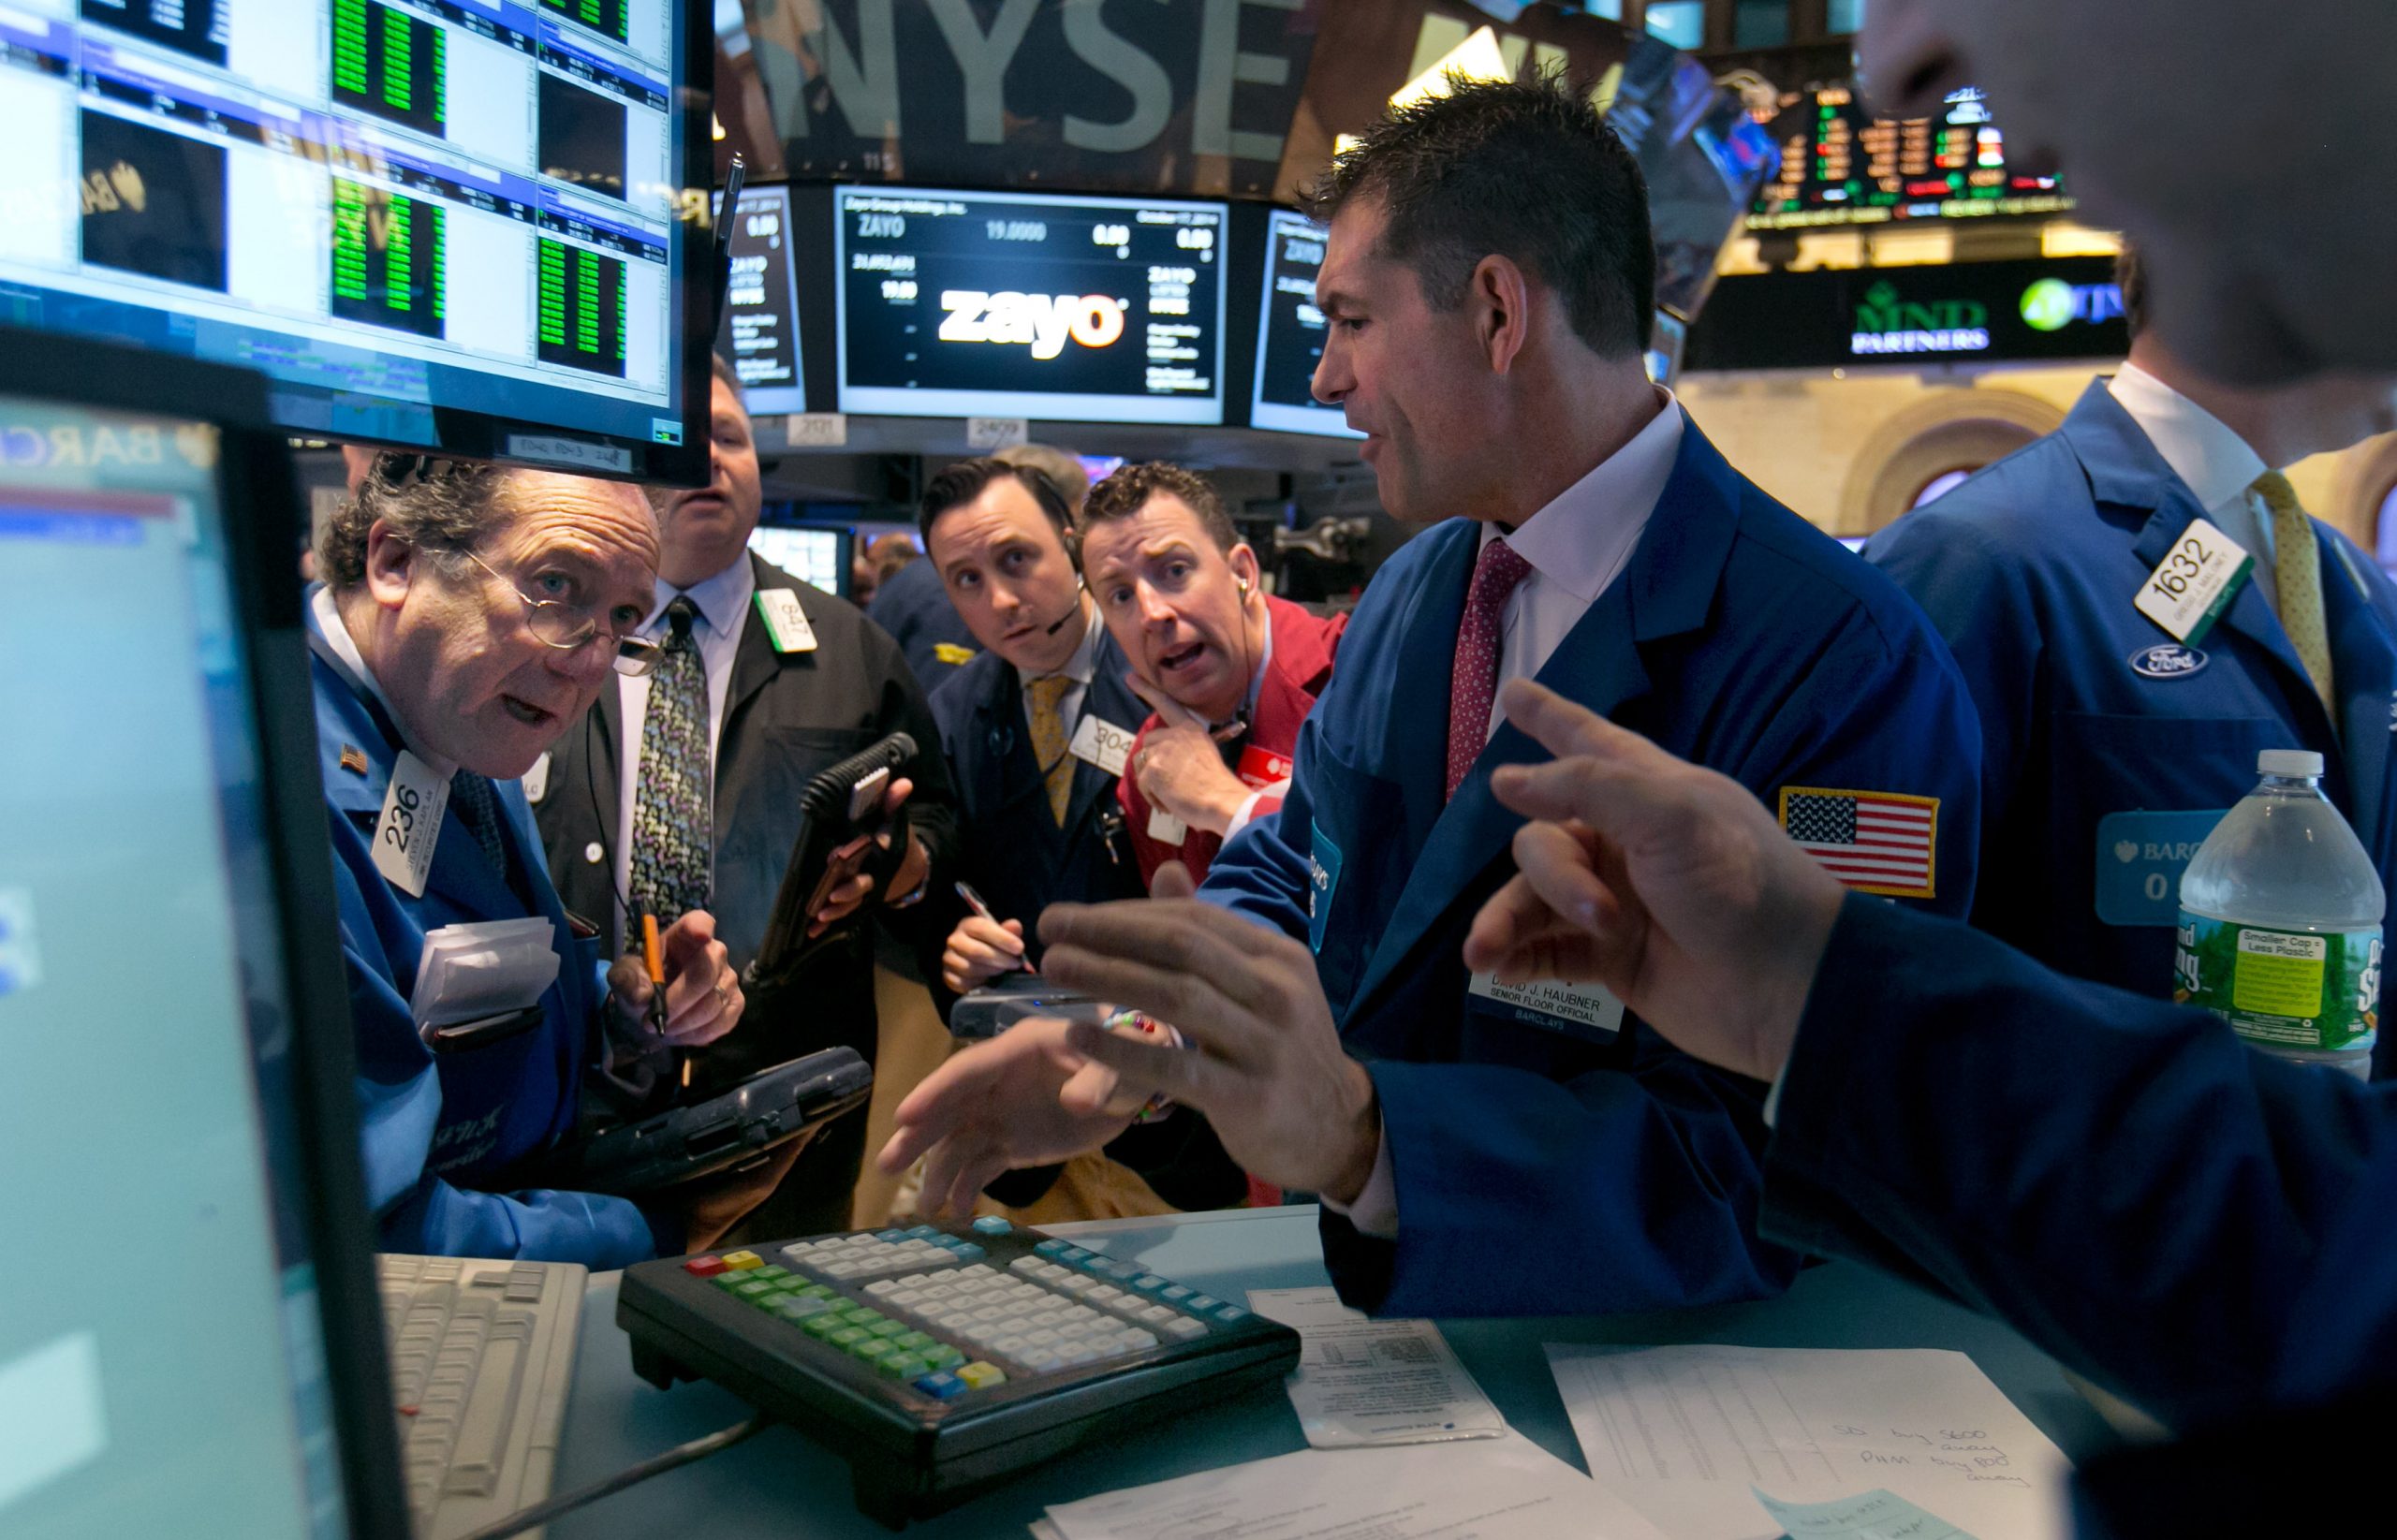 Specialist David Haubner works with traders at his post on the floor of the New York Stock Exchange, Friday, Oct. 17, 2014. U.S. stocks opened higher Friday as investors weighed the latest corporate earnings news and data showing home construction picked up last month. (AP Photo/Richard Drew)